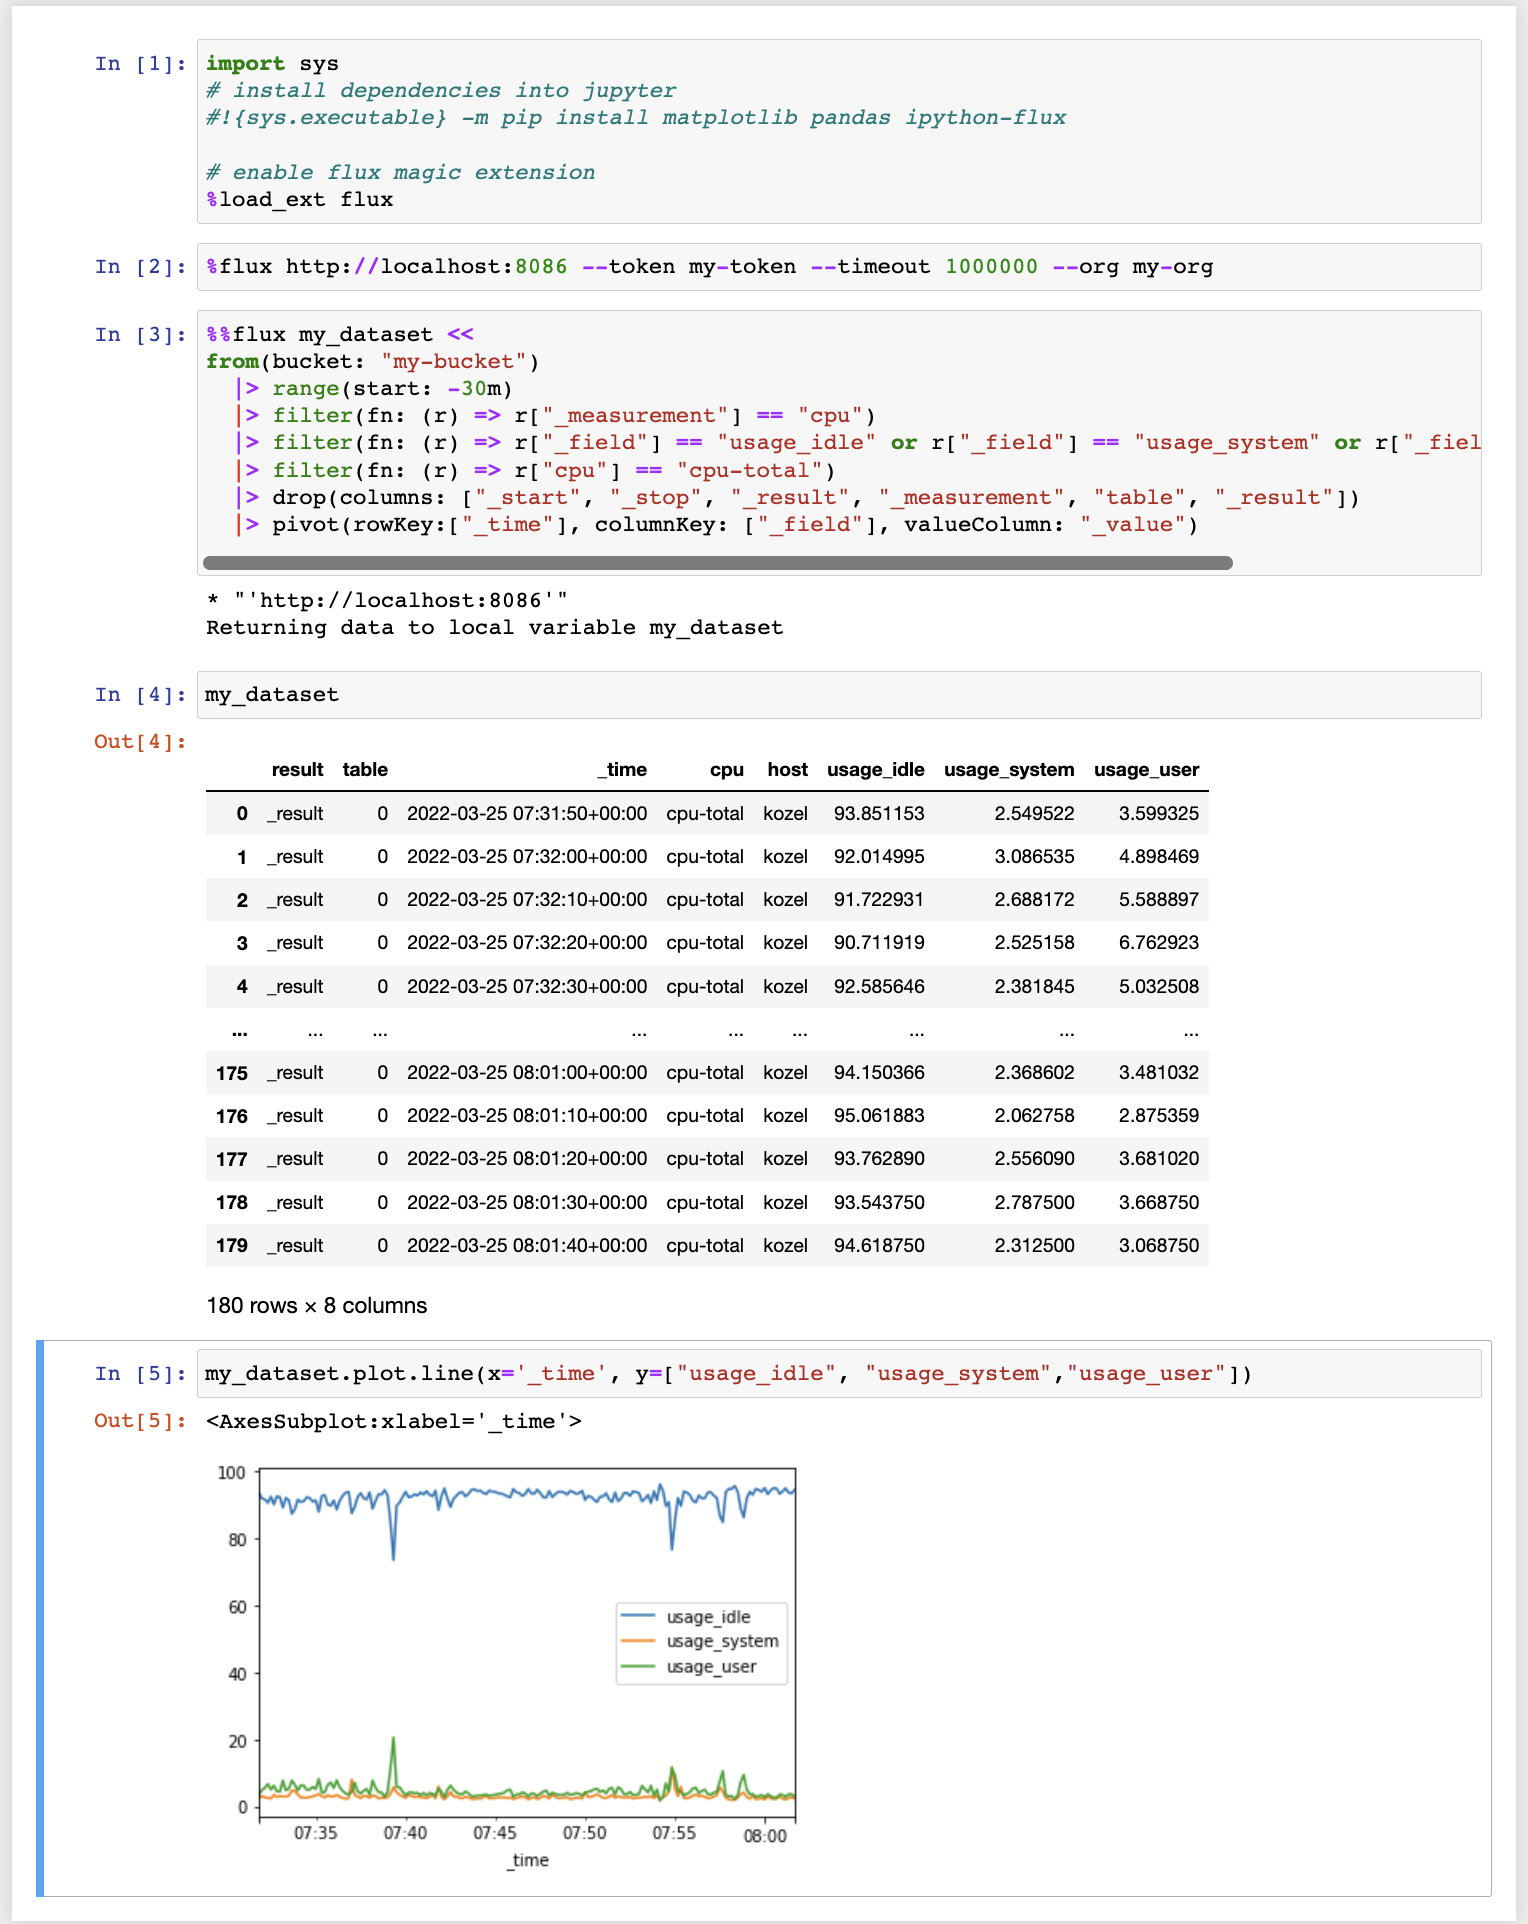 screenshot of ipython-flux in the Notebook